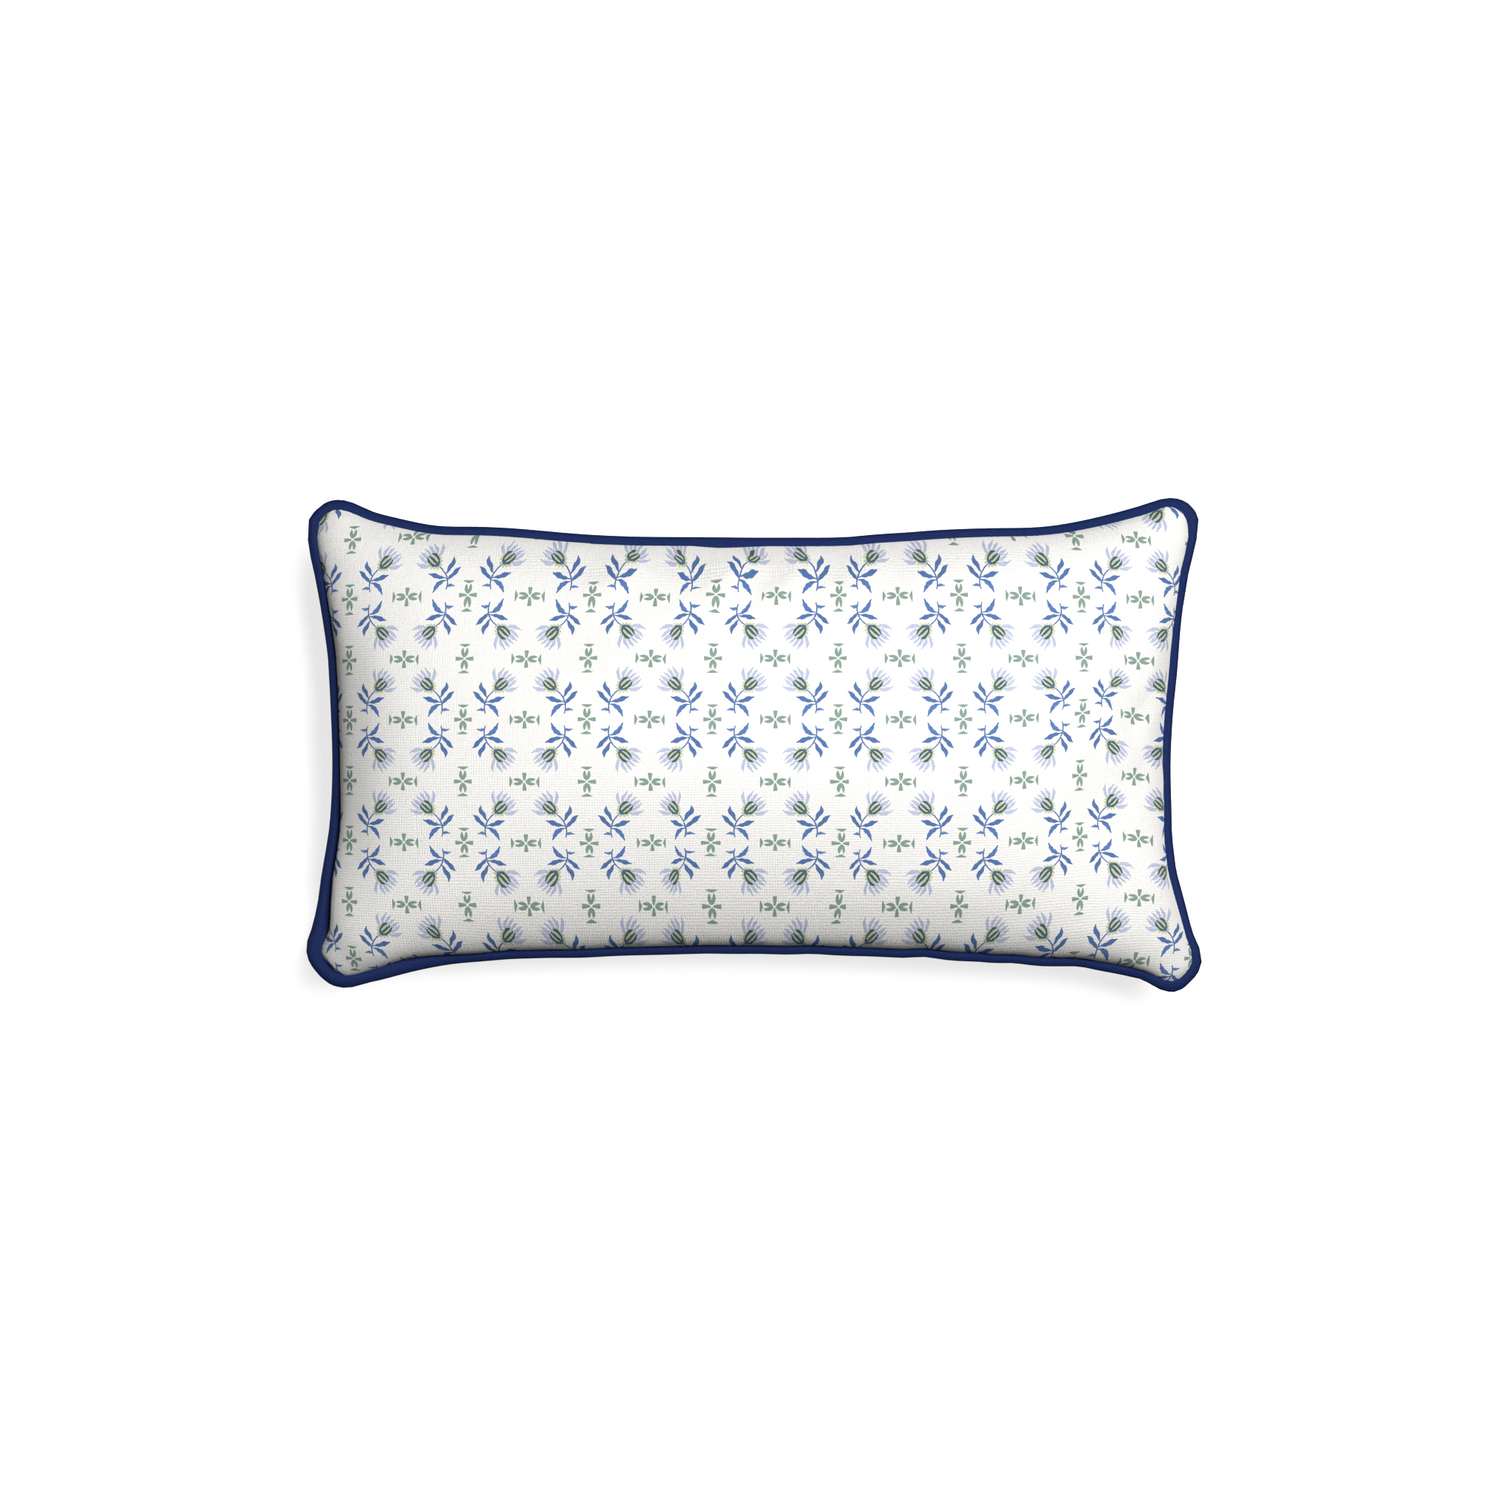 Petite-lumbar lee custom blue & green floralpillow with midnight piping on white background